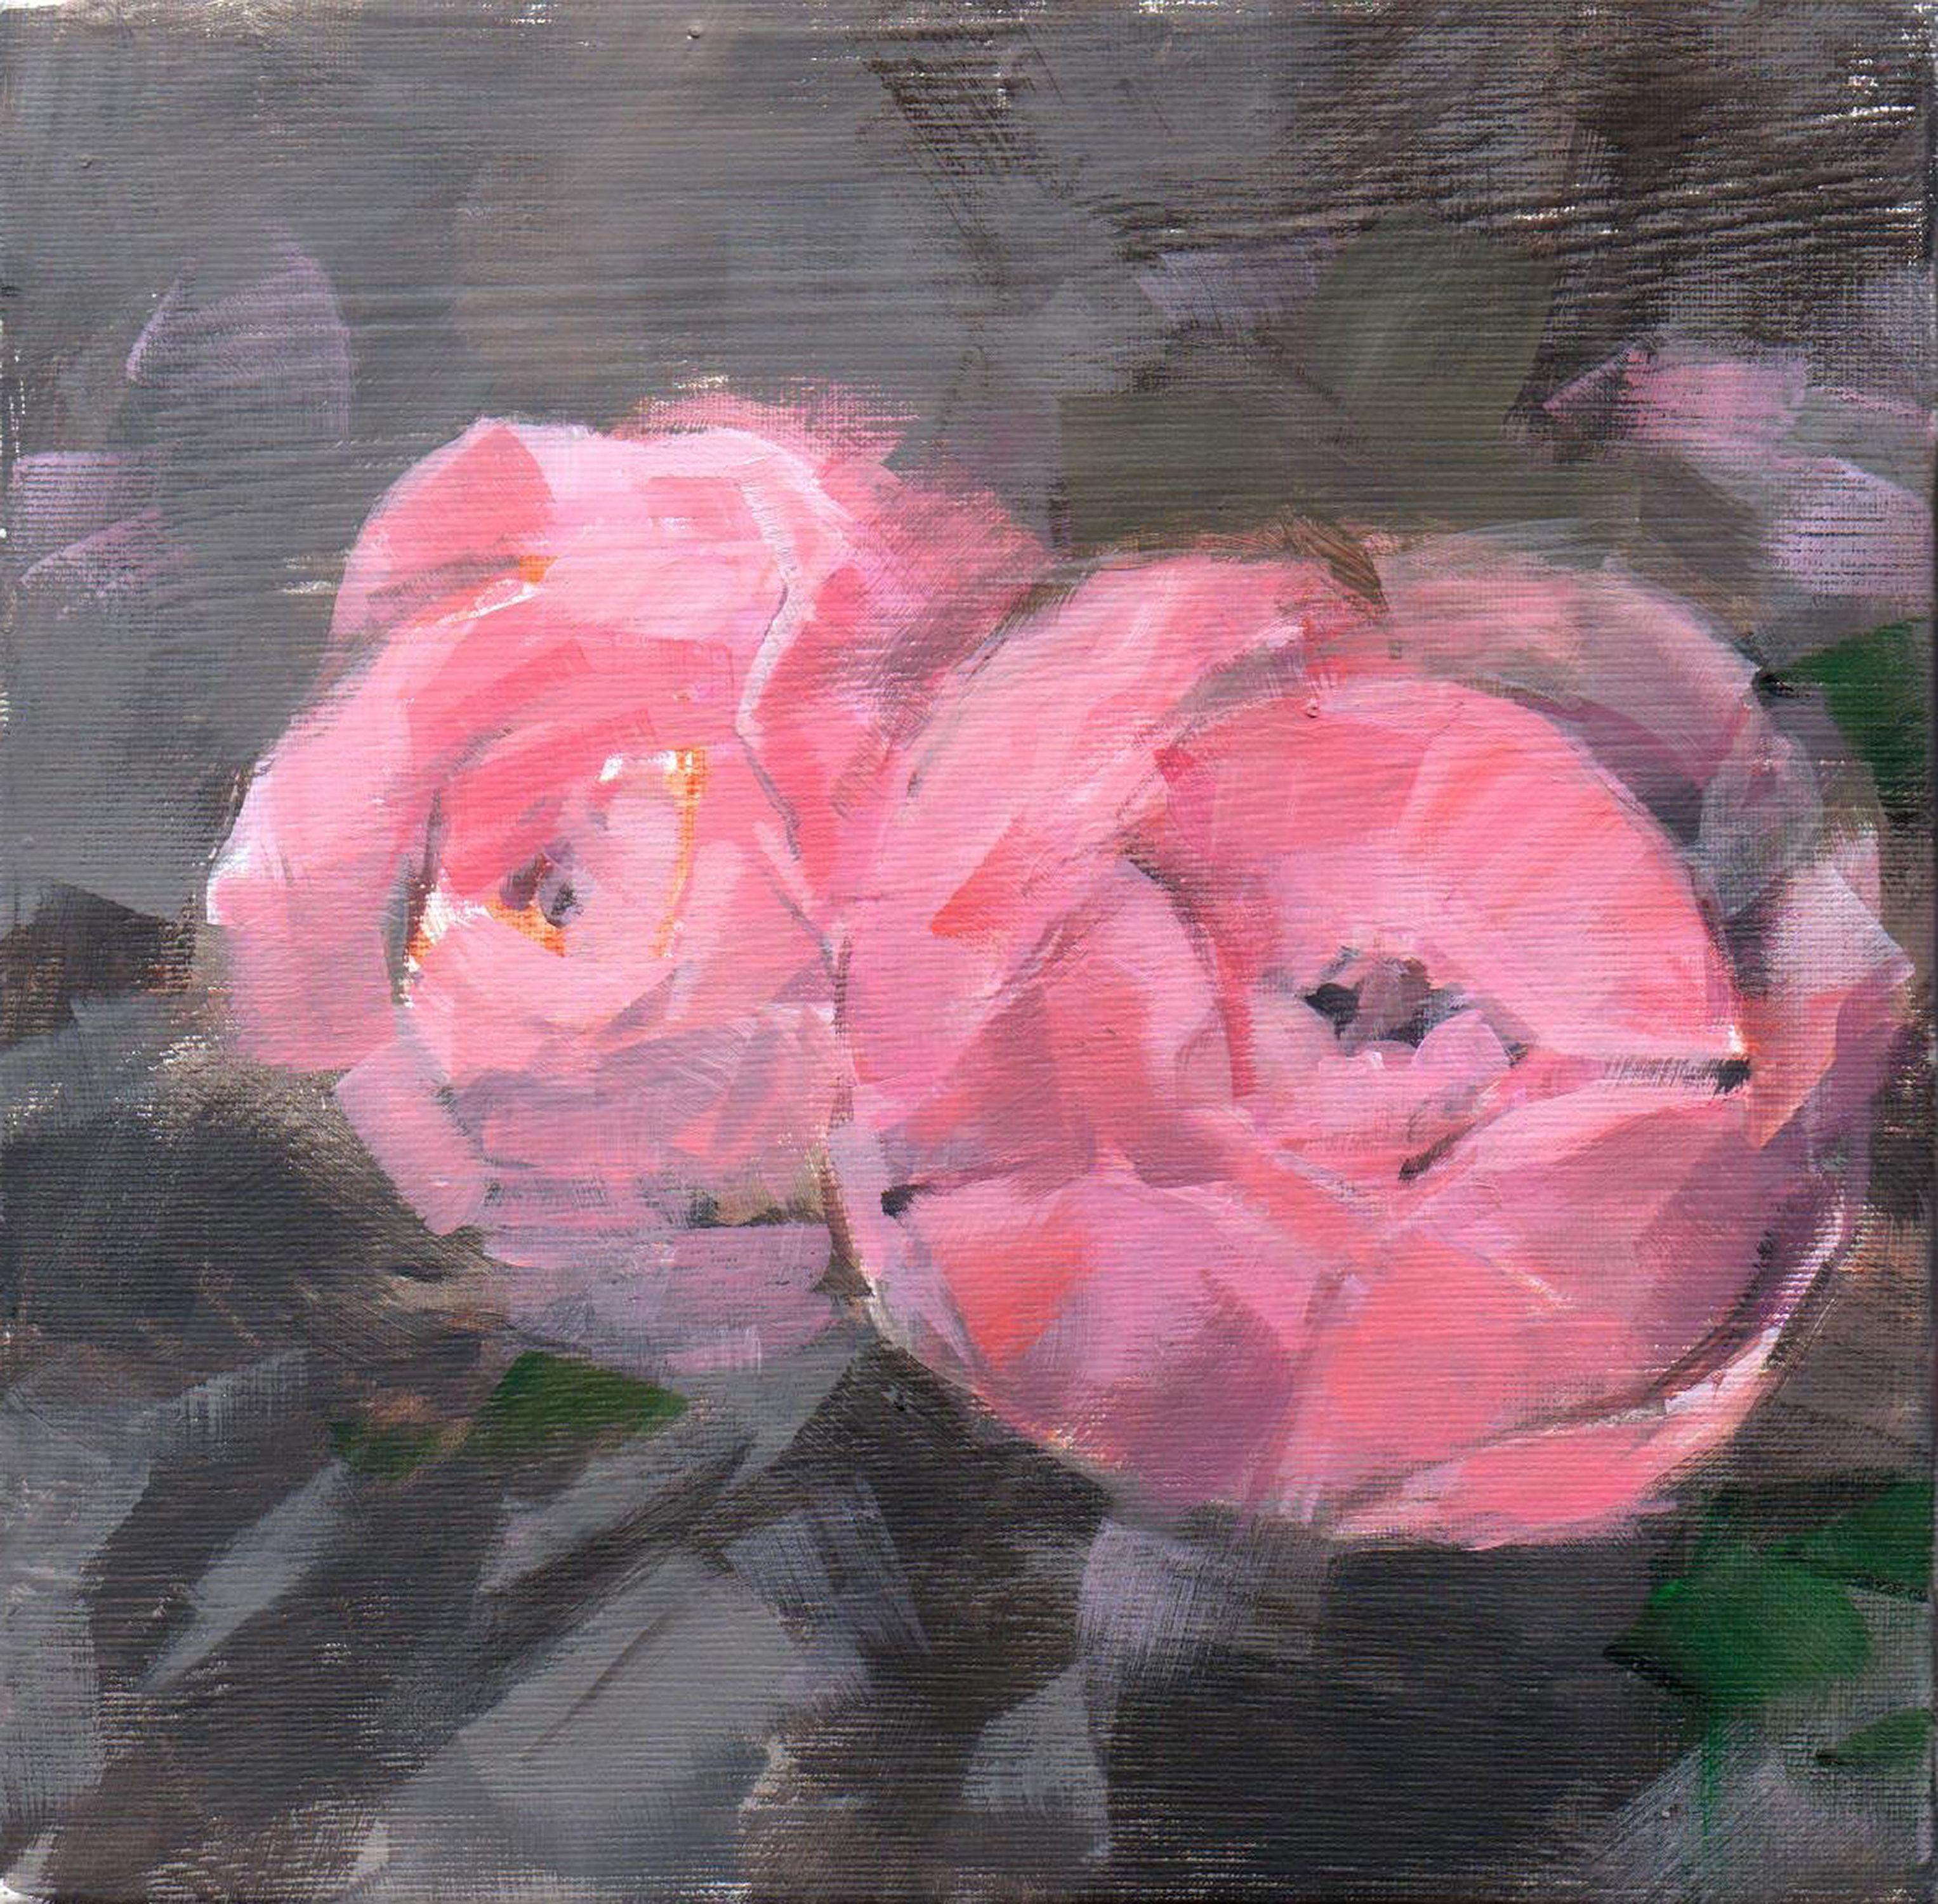 Roses as if in a dream. :: Painting :: Contemporary :: This piece comes with an official certificate of authenticity signed by the artist :: Ready to Hang: No :: Signed: Yes :: Signature Location: Lower right :: Canvas :: Diagonal :: Original ::